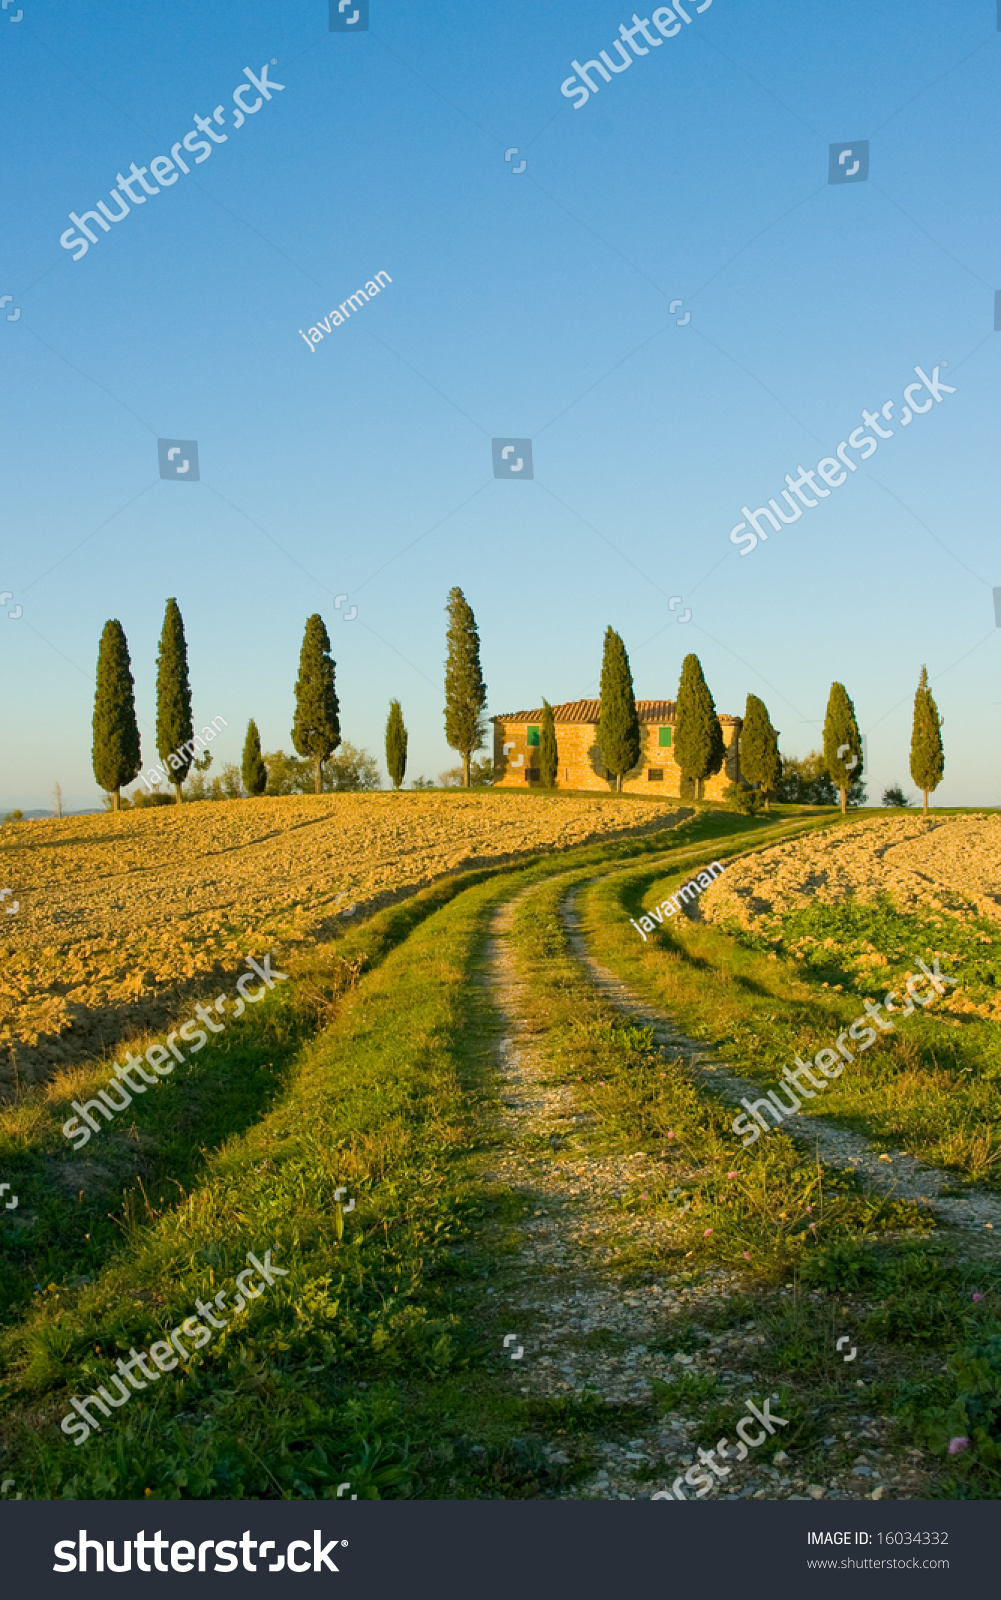 Image Of Typical Tuscan Landscape Stock Photo 16034332 ...